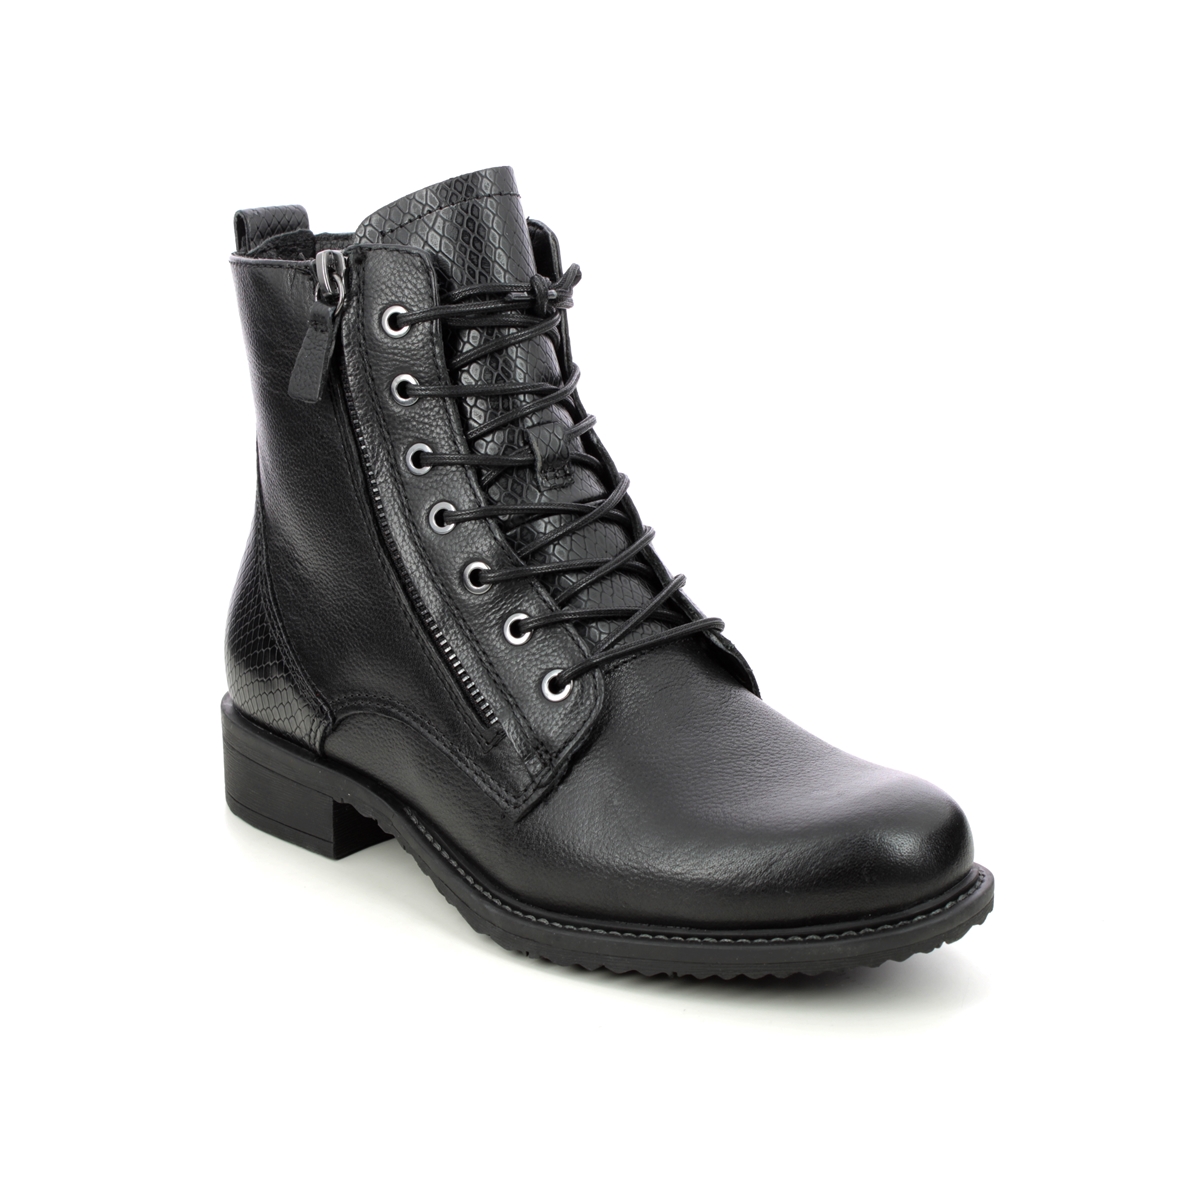 Tamaris Anouk Zip Ronja Black Leather Womens Lace Up Boots 25211-29-074 In Size 39 In Plain Black Leather